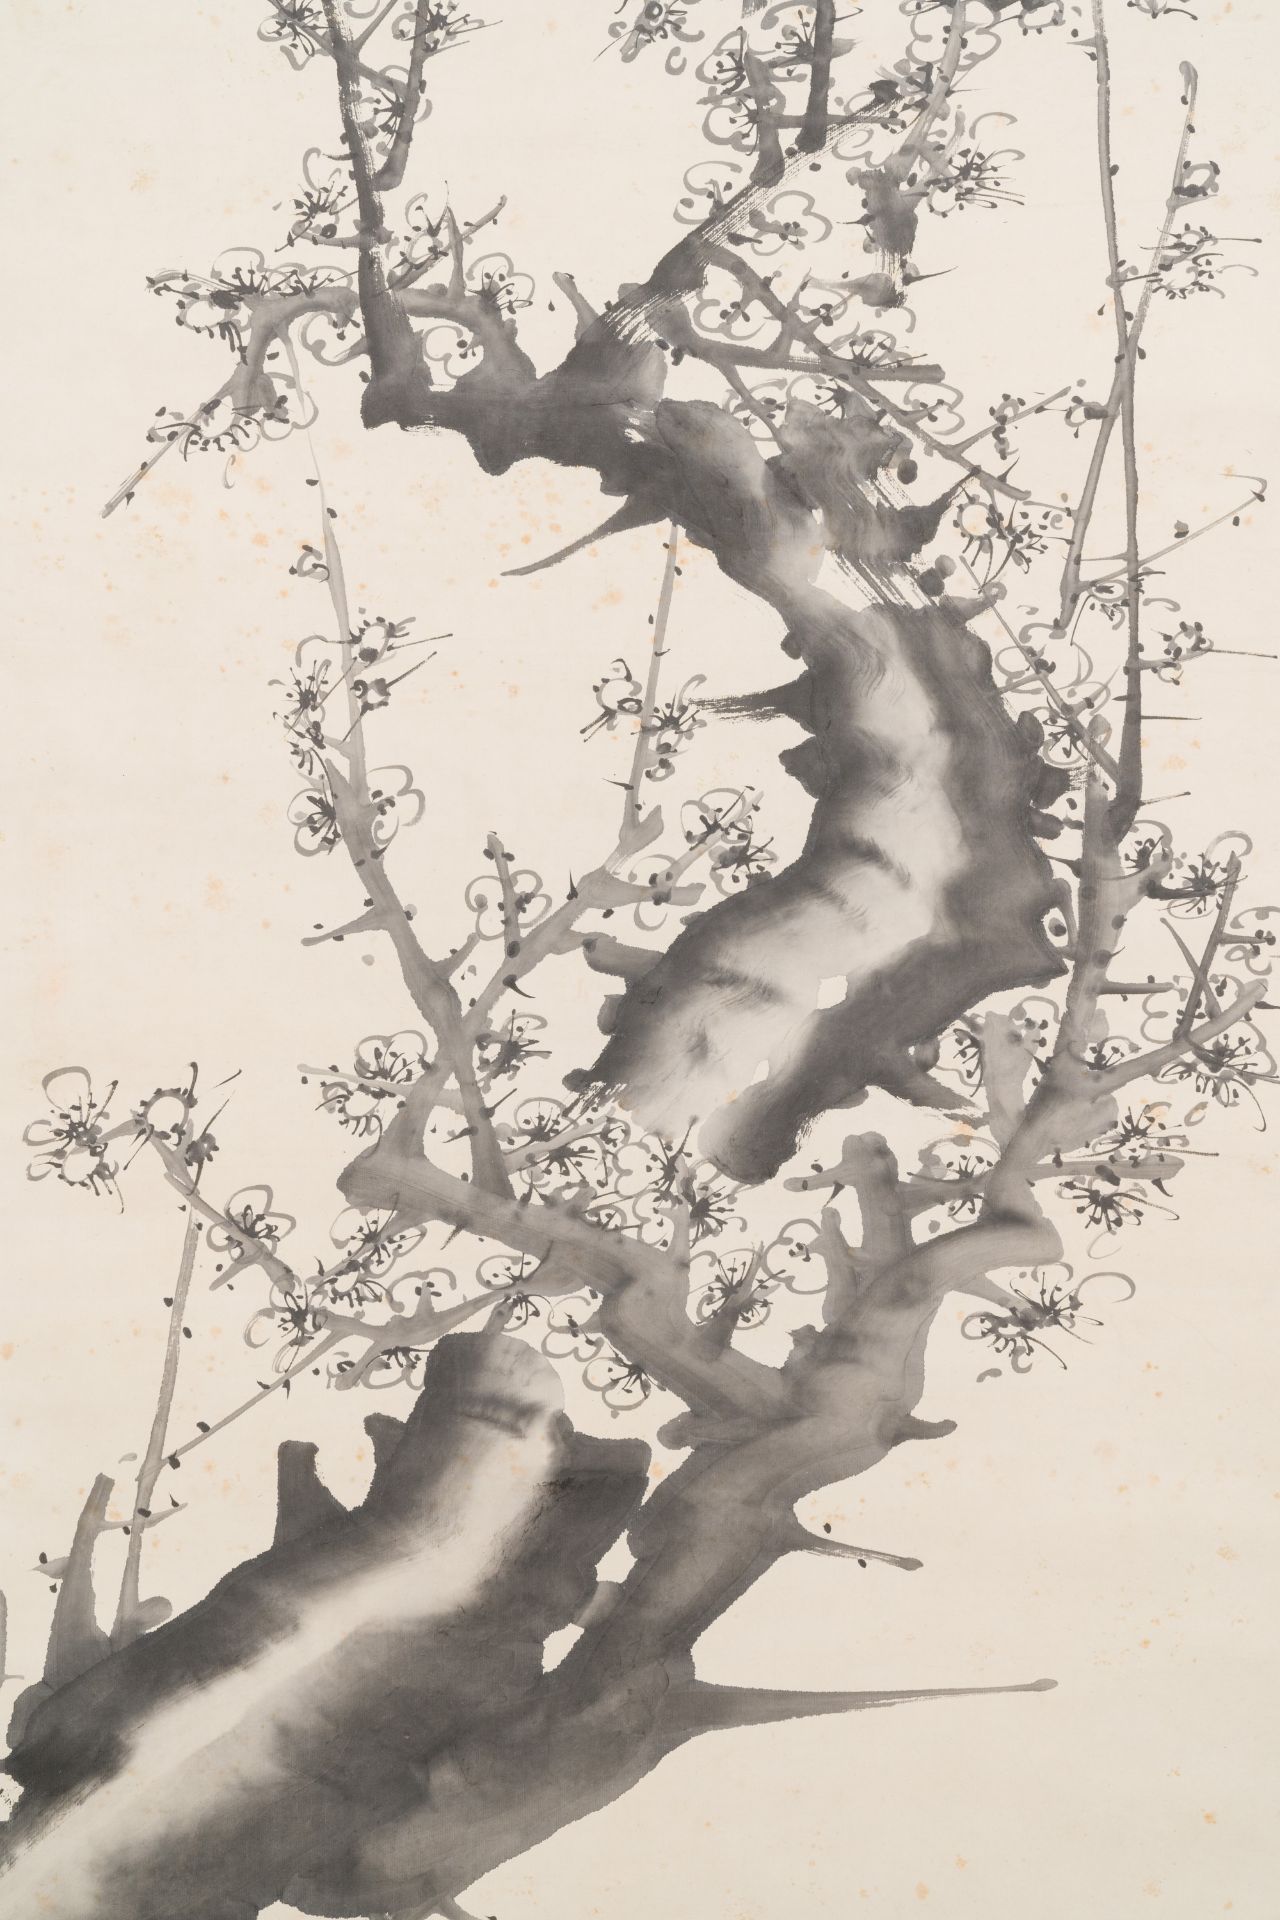 Cao Kun 曹锟 (1862-1938): 'Plum blossom', ink on paper, dated 1927 - Image 4 of 5